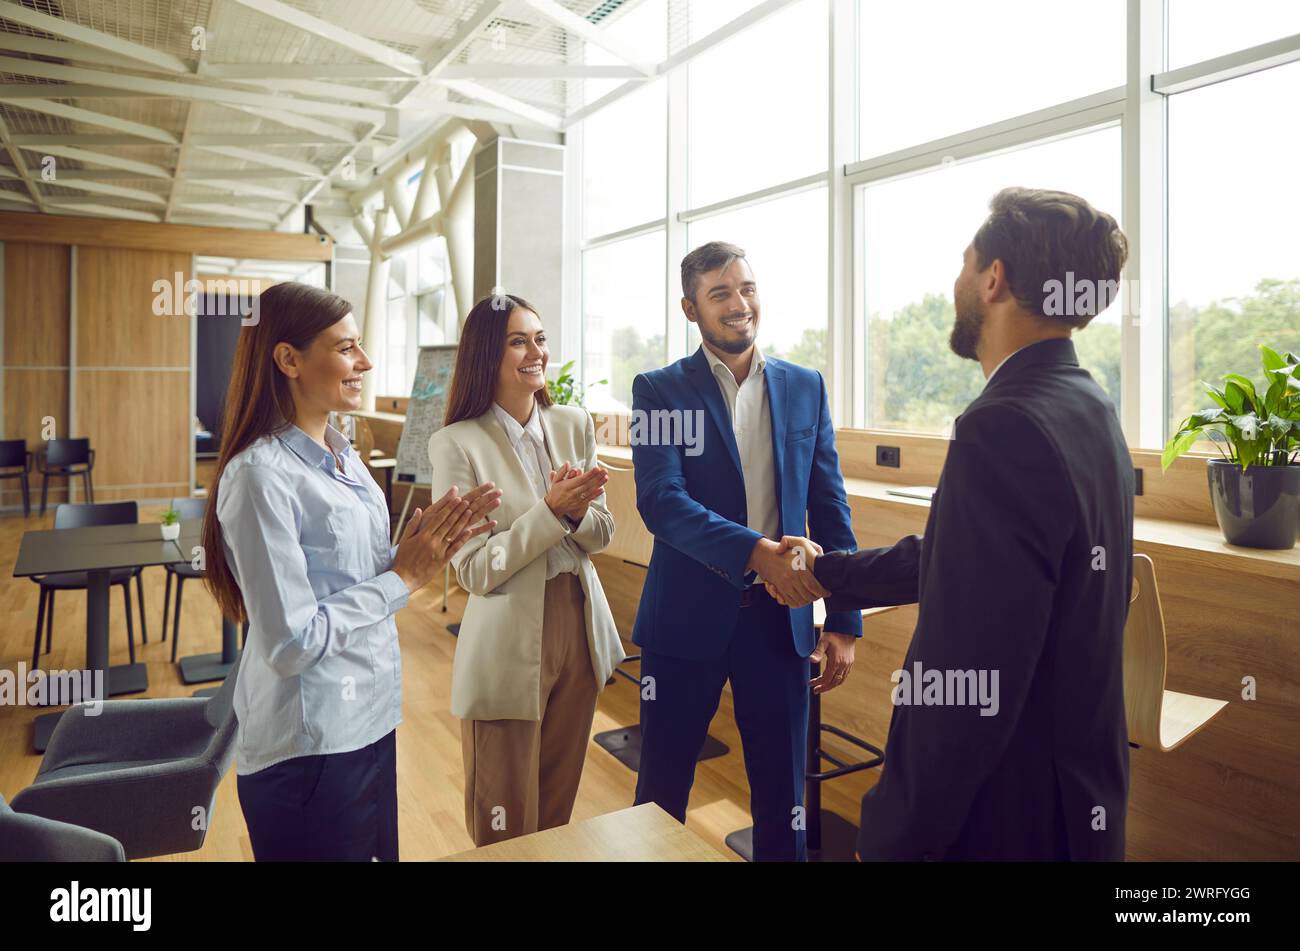 Business people meet new office colleague, handshake to greet, congratulate Stock Photo